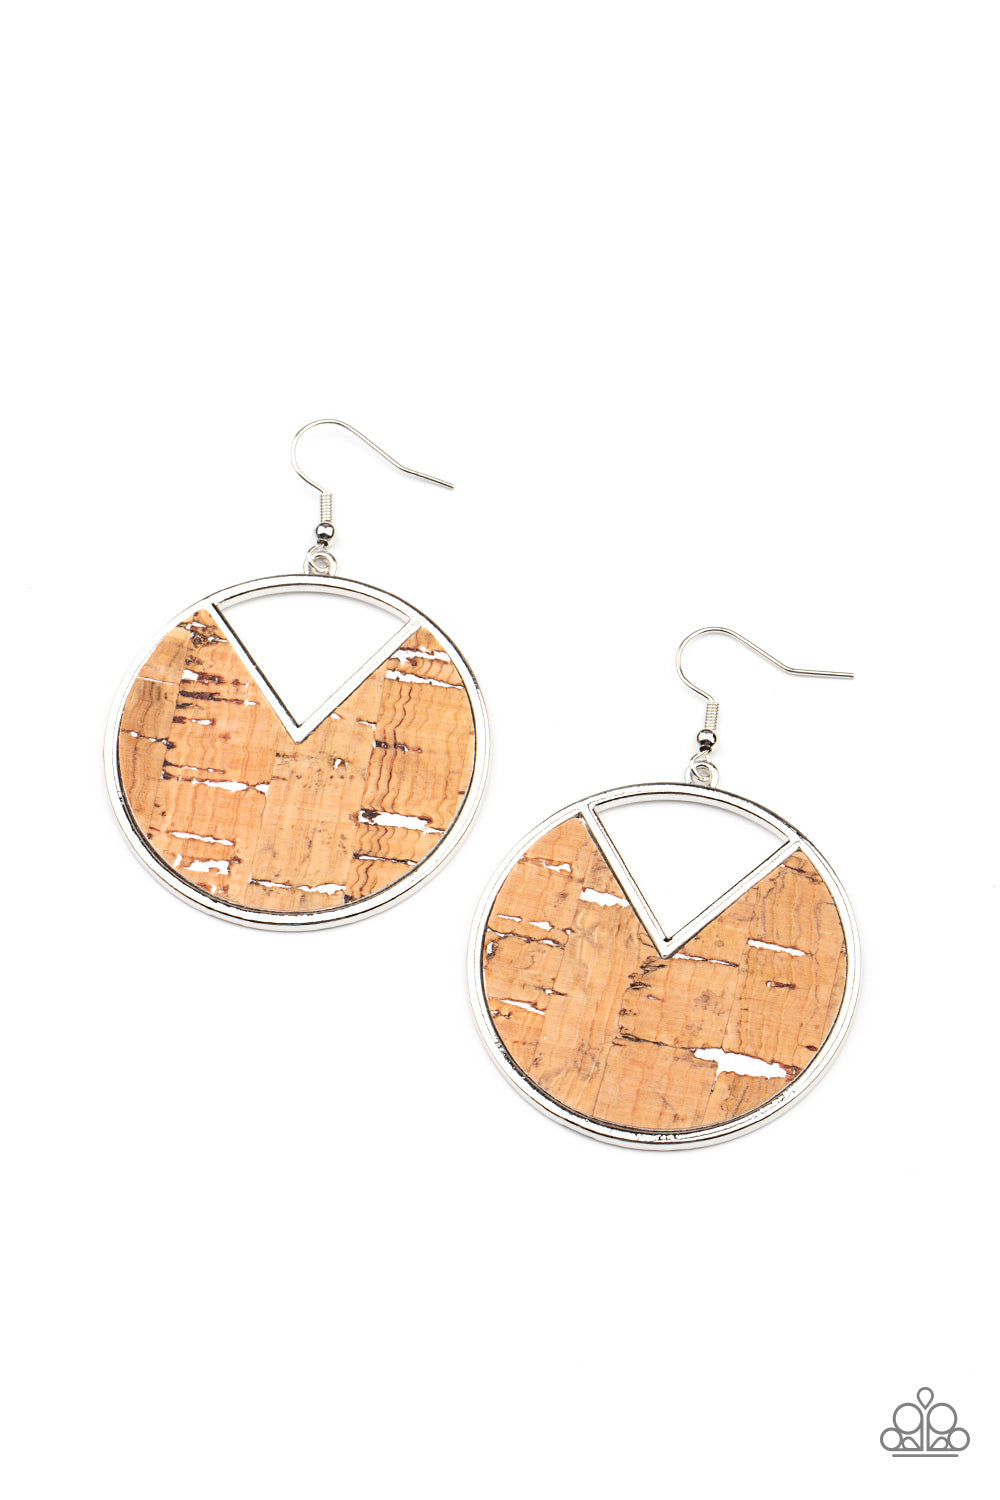 Nod to Nature - White & Brown Cork Earrings - Princess Glam Shop